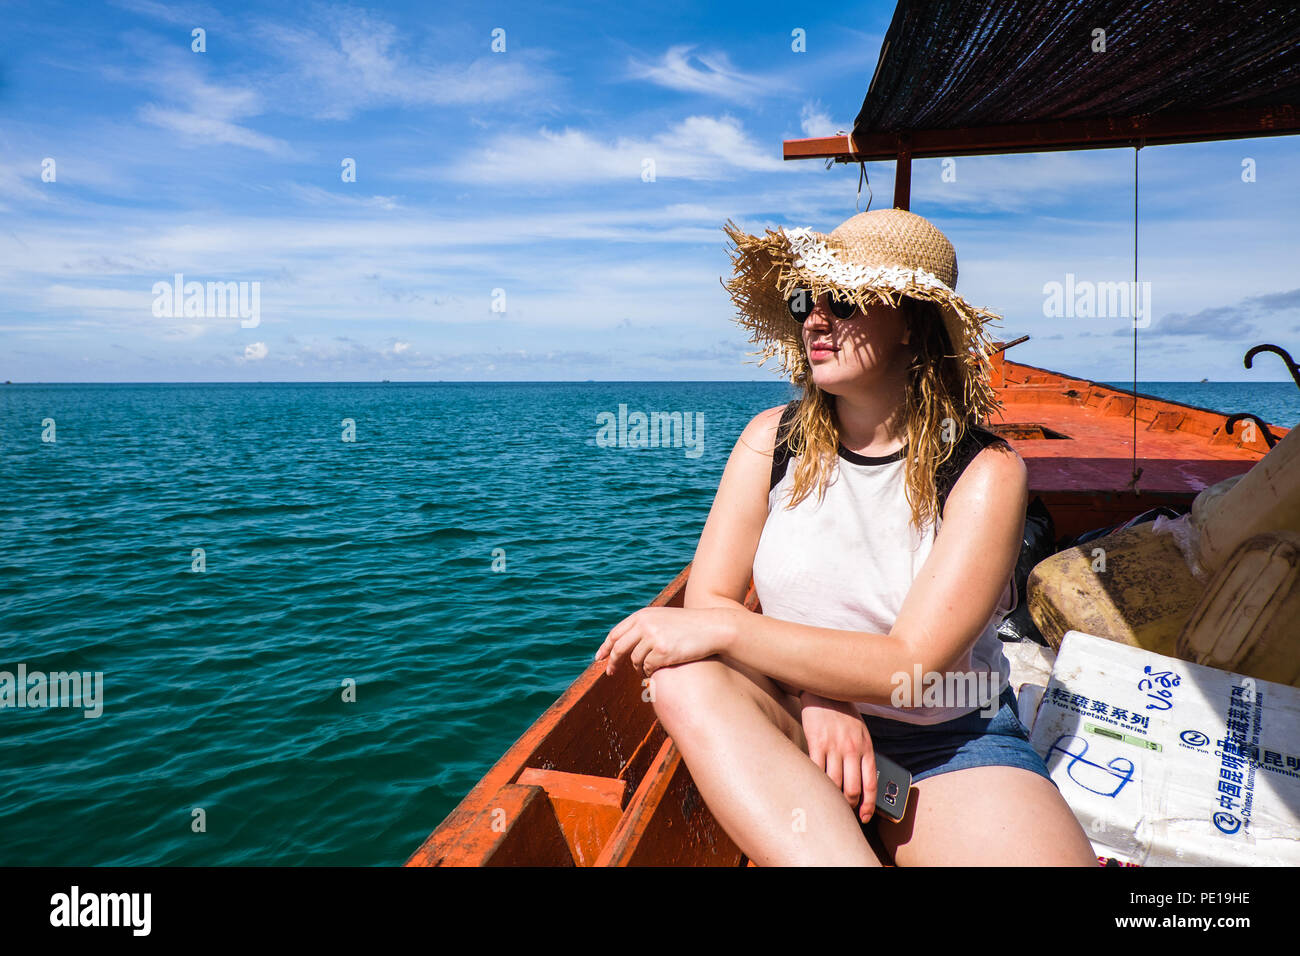 A woman on a budget-friendly wooden boat taking supplies and passengers between Koh Rong Samloem and Sihanoukville, Cambodia Stock Photo